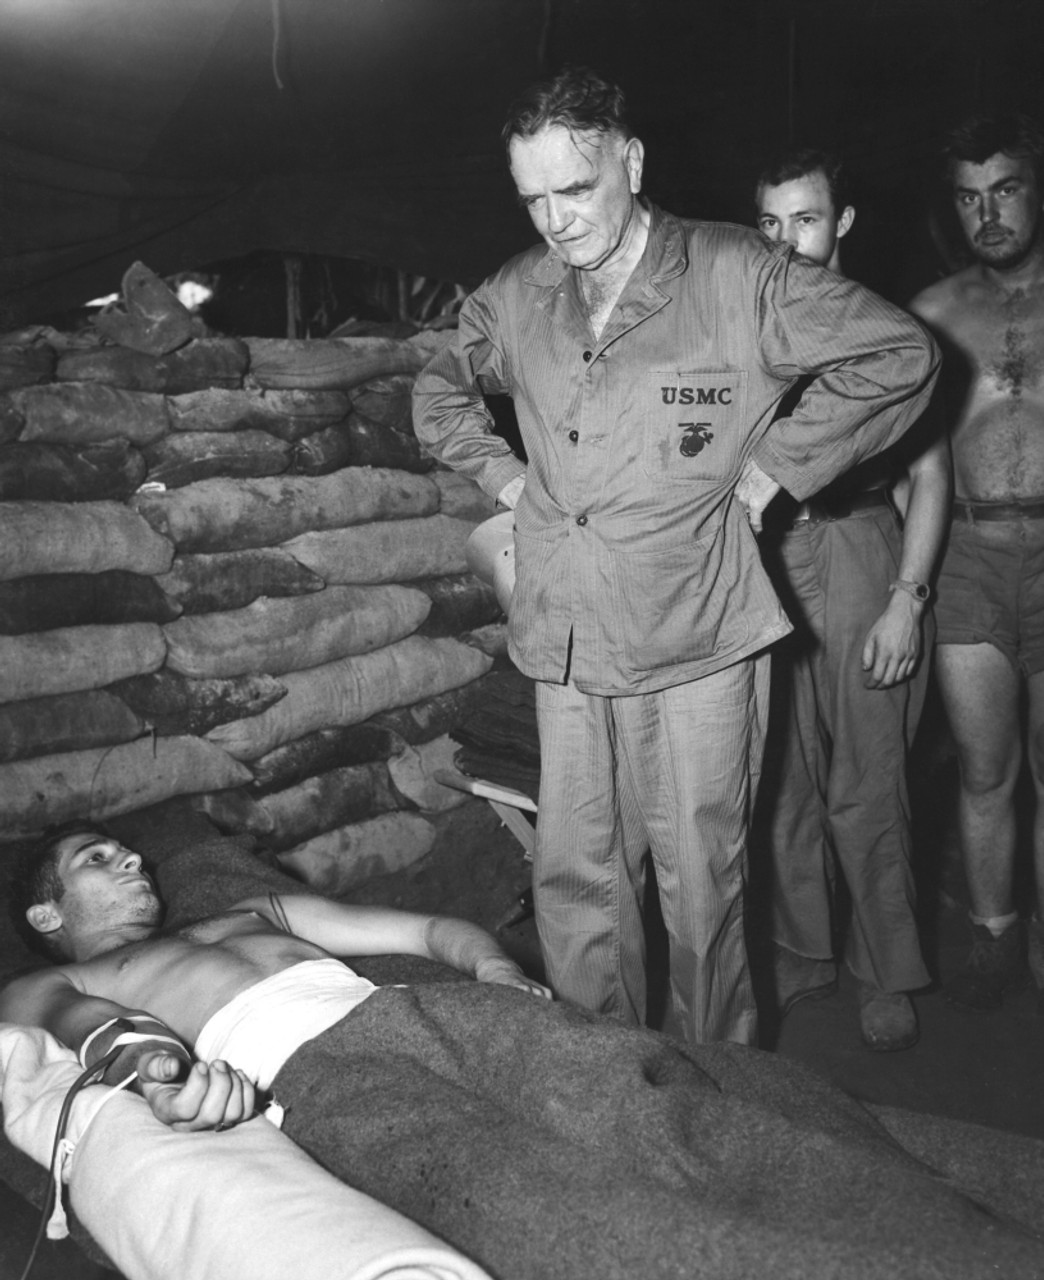 Admiral William Halsey Visiting A Sandbagged Hospital Dugout At Bougainville The Soldier Is